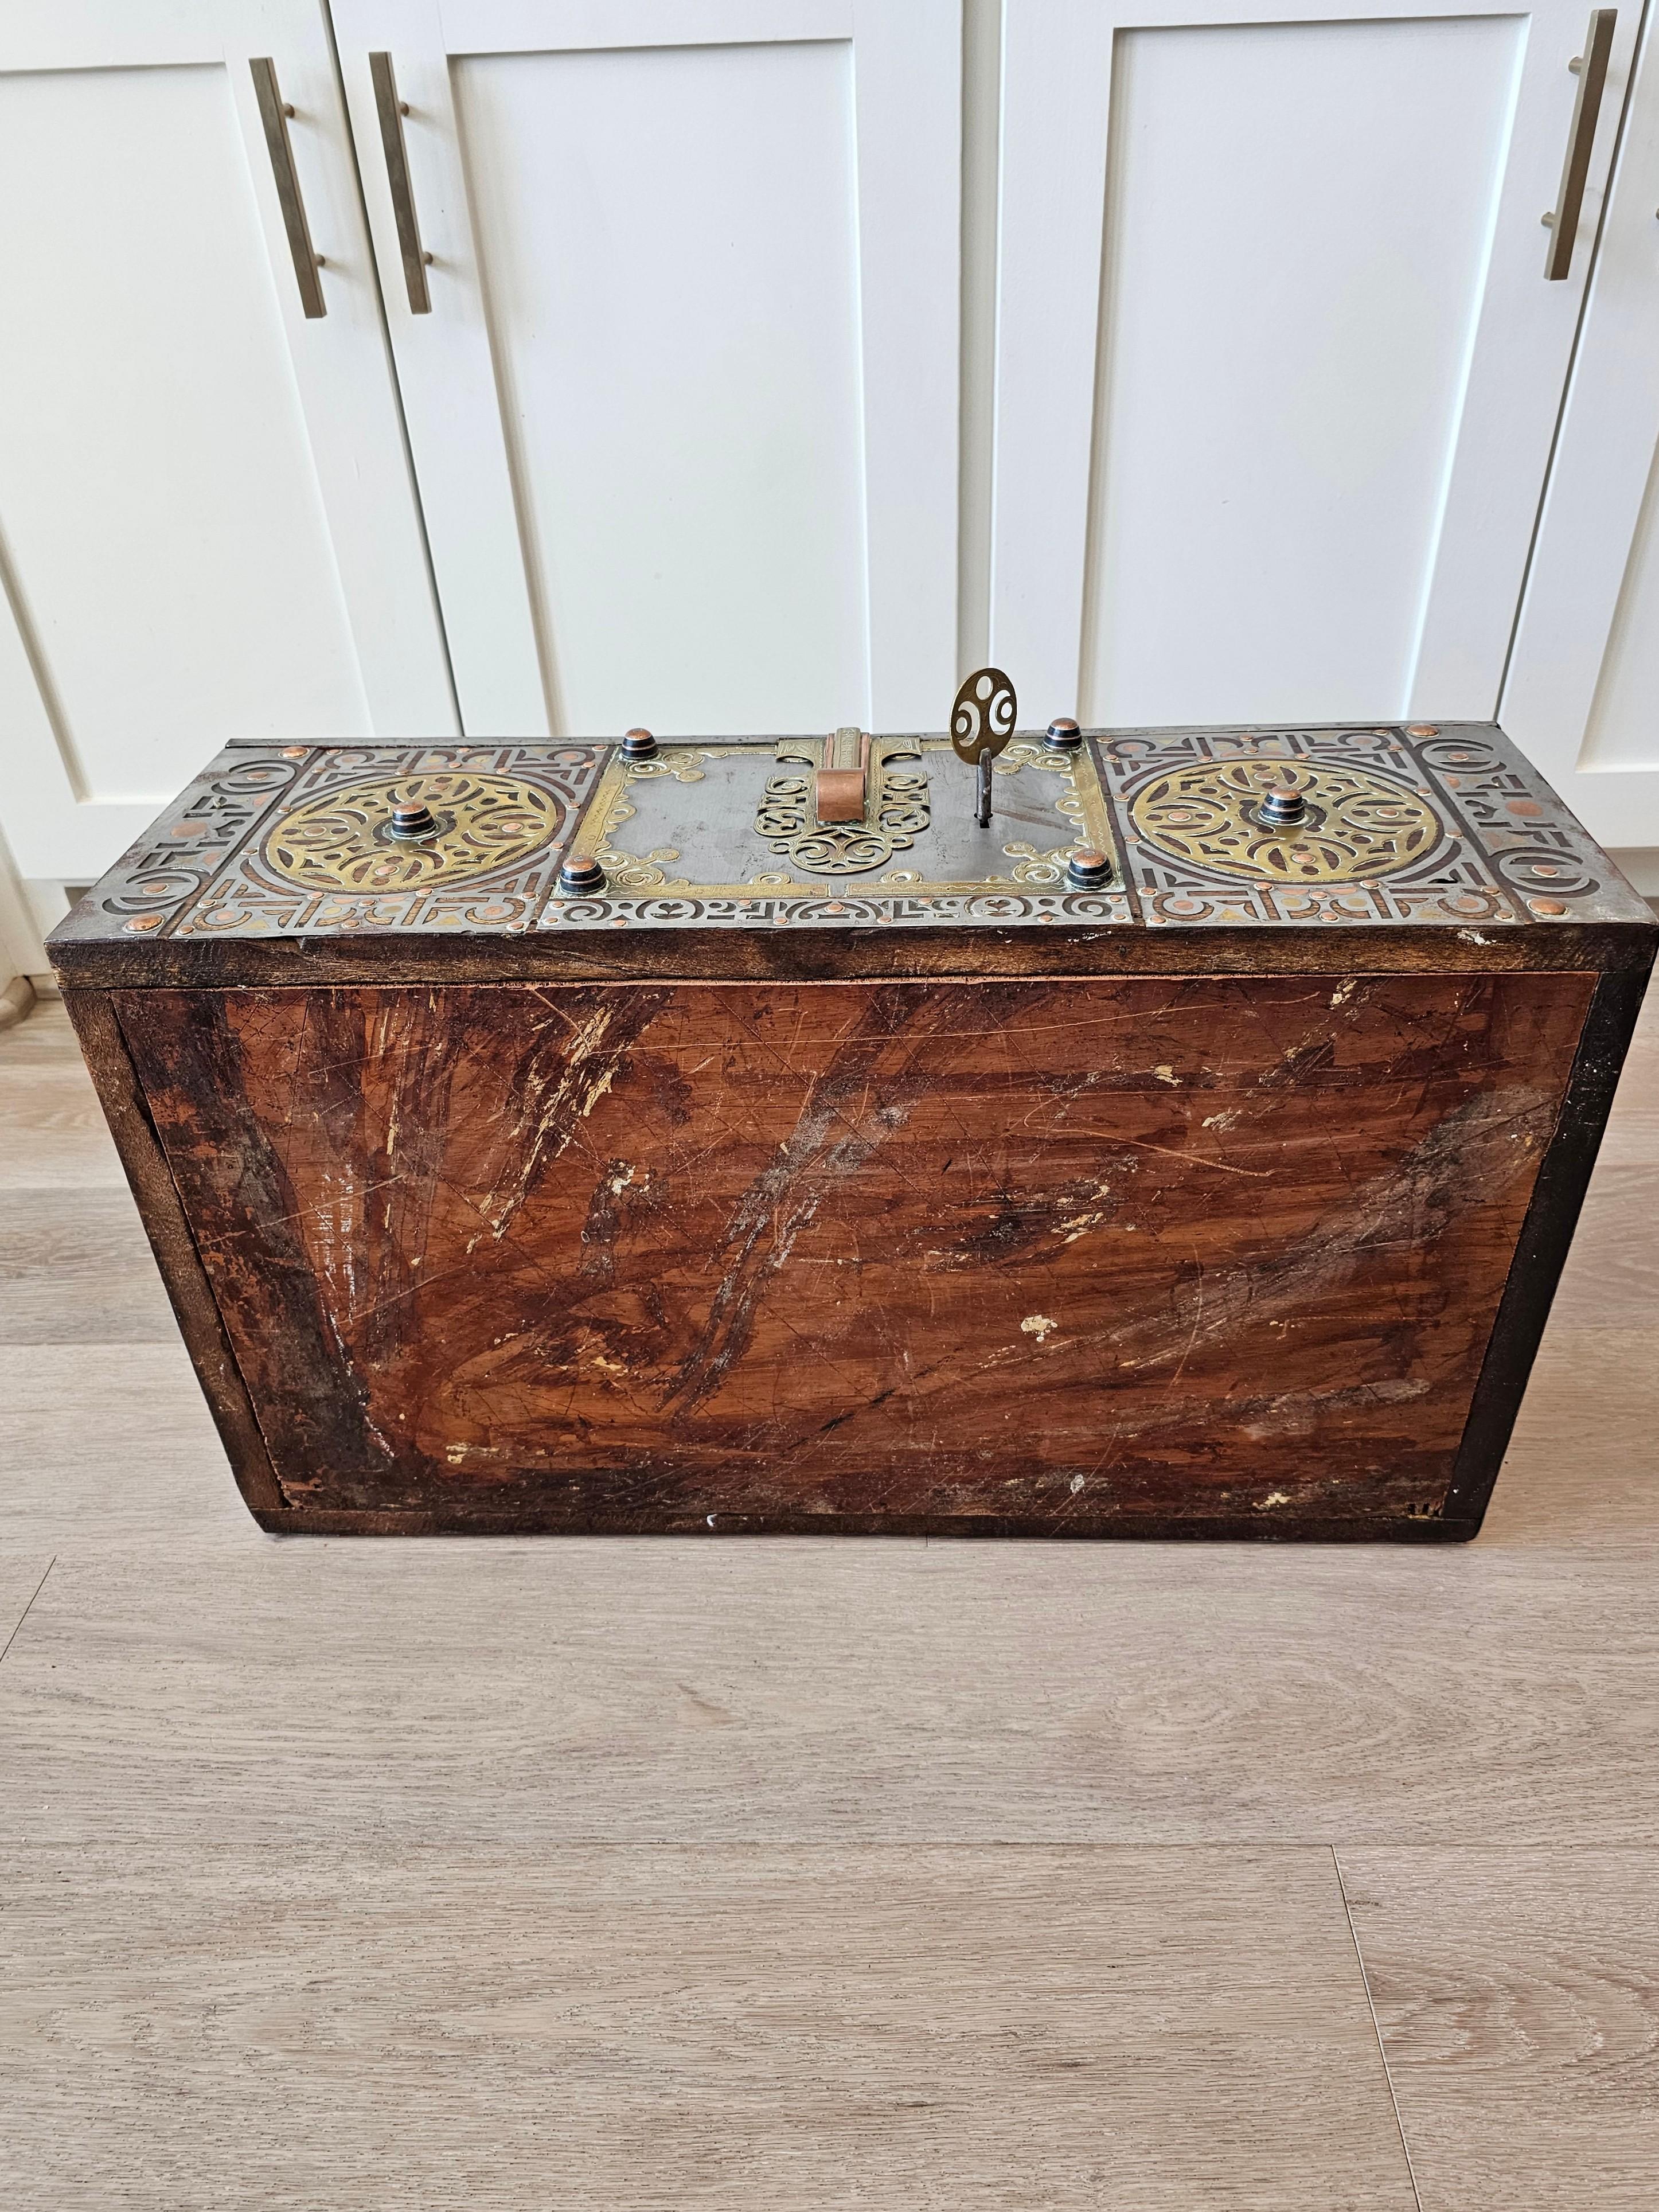 Scarce Antique Tuareg Mauritania North Africa Mixed Metal Mounted Wood Chest  For Sale 7